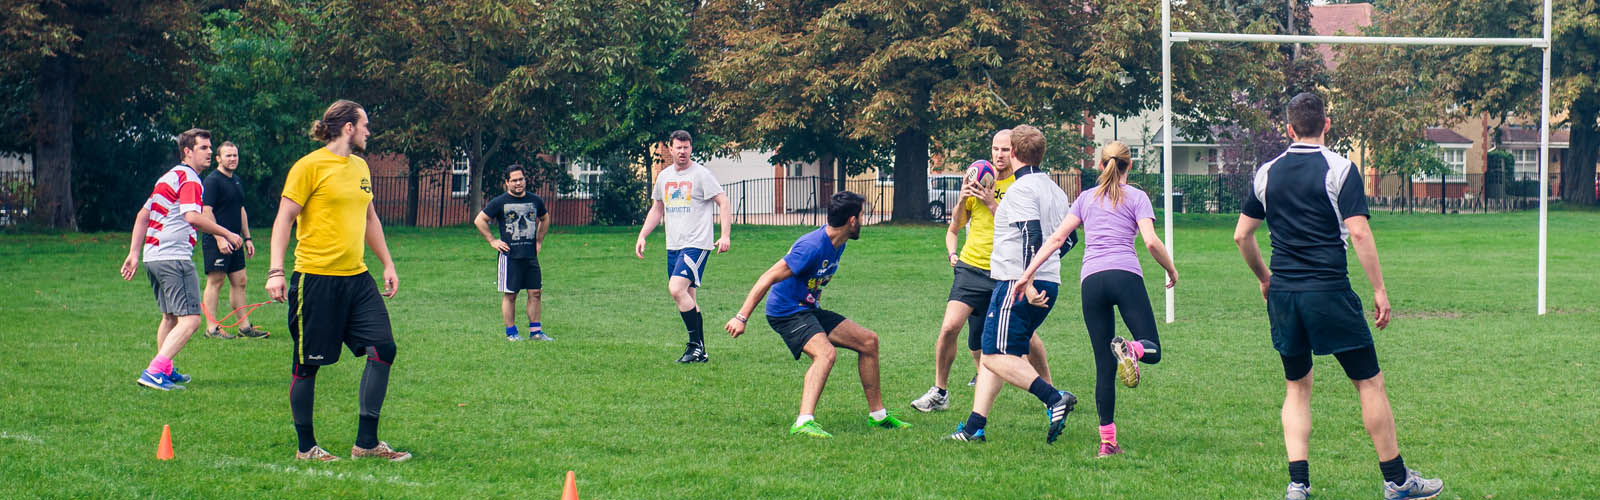 london touch rugby south west london